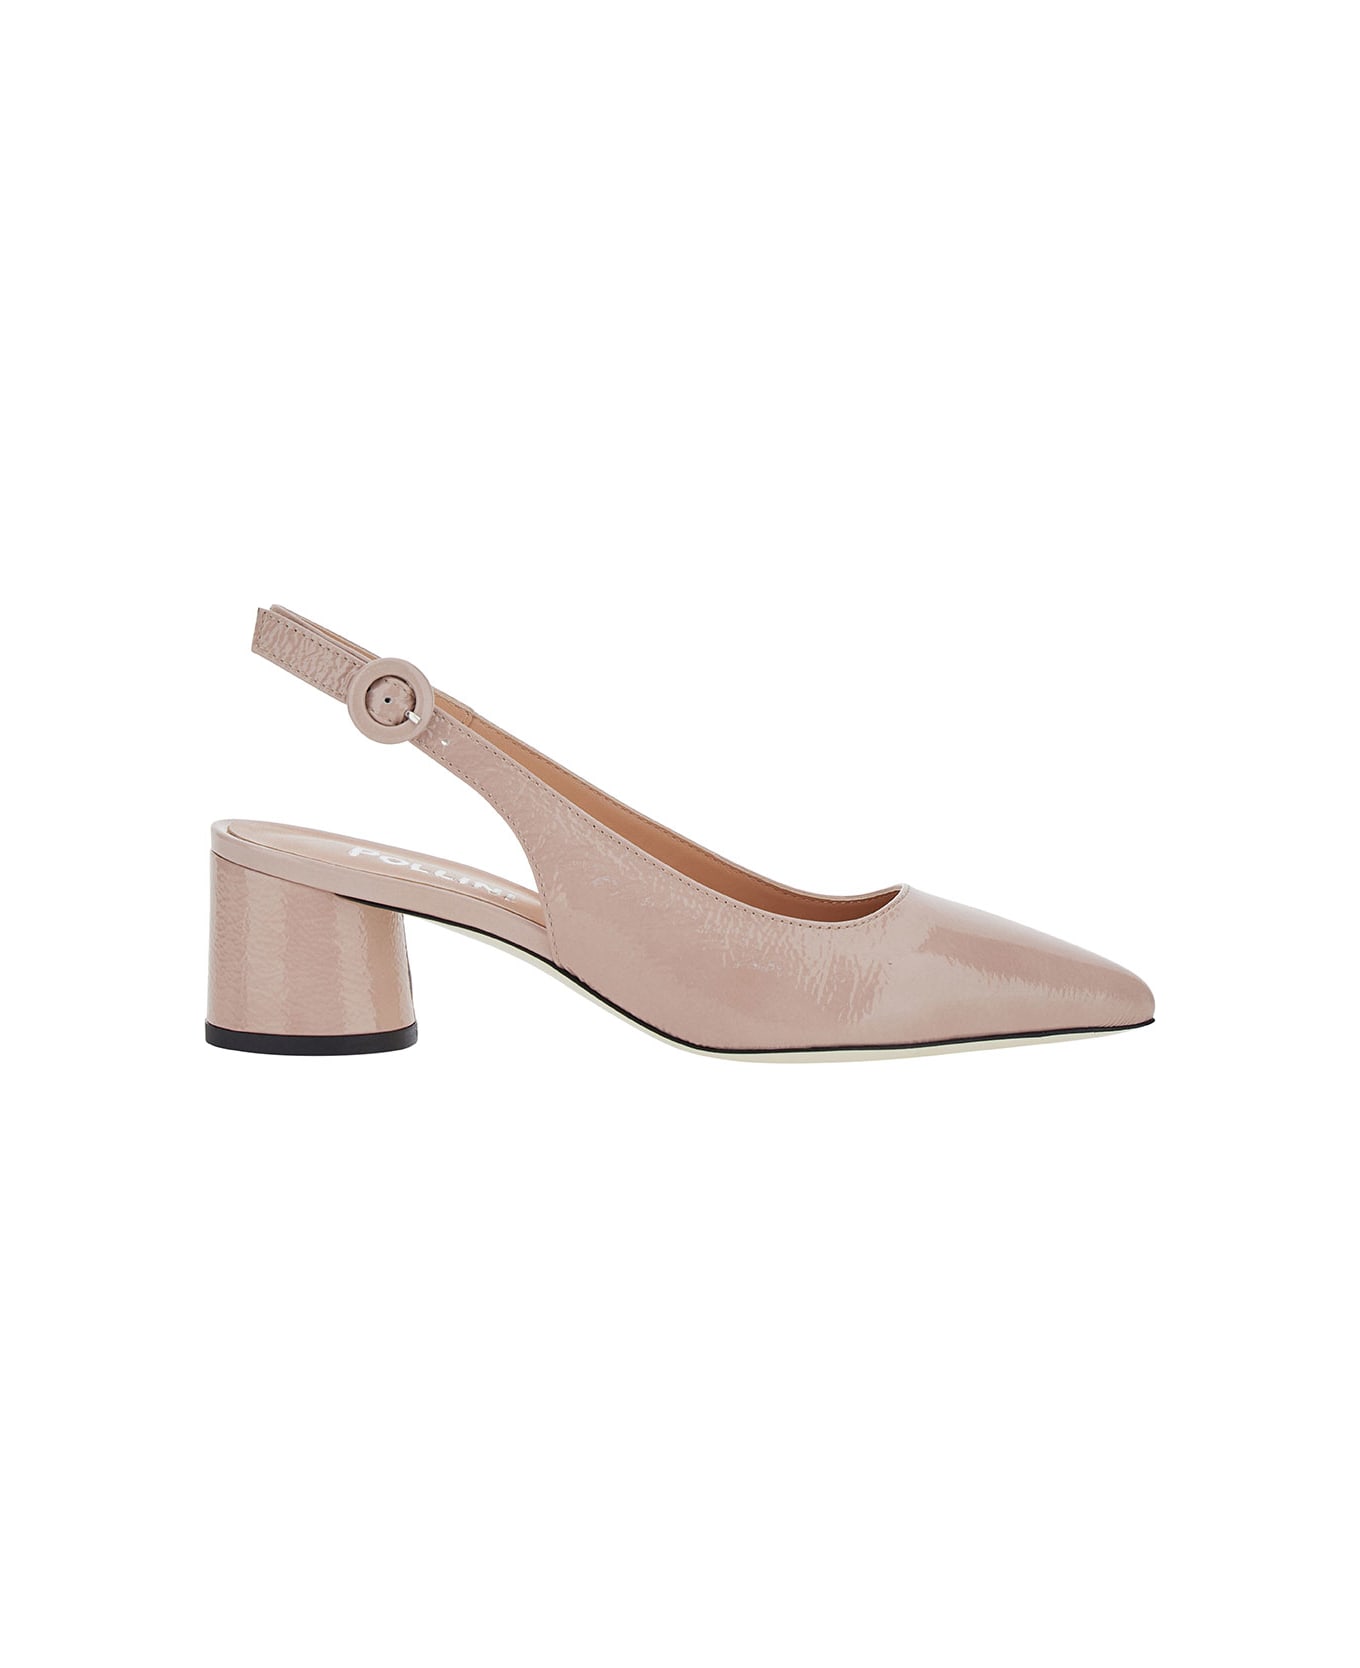 Pollini Pink Slingback Pumps With Block Heel In Leather Woman - Pink